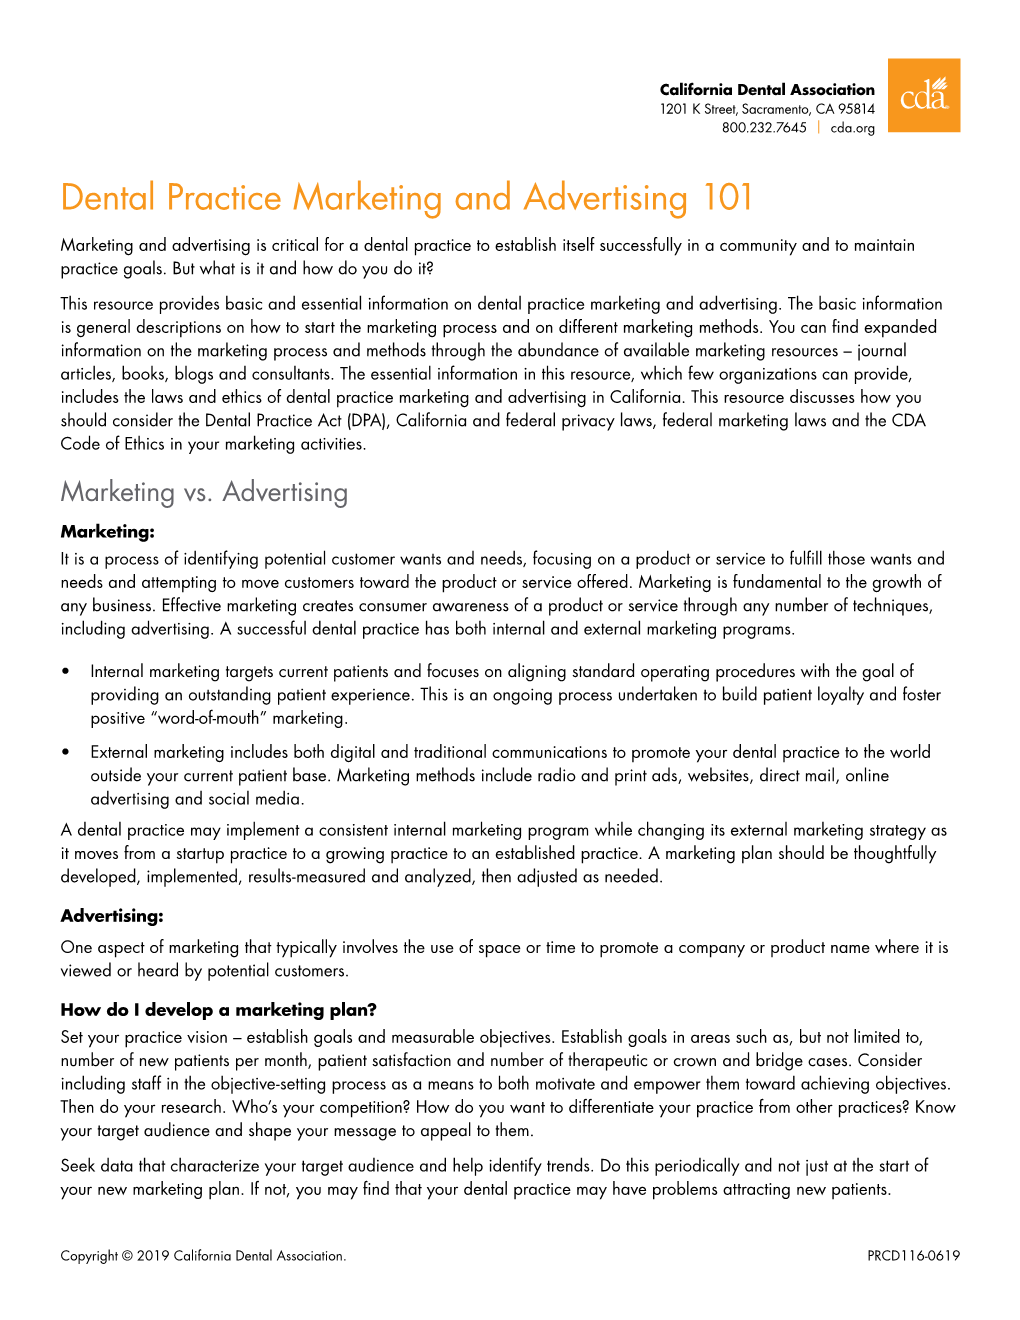 Dental Practice Marketing and Advertising 101